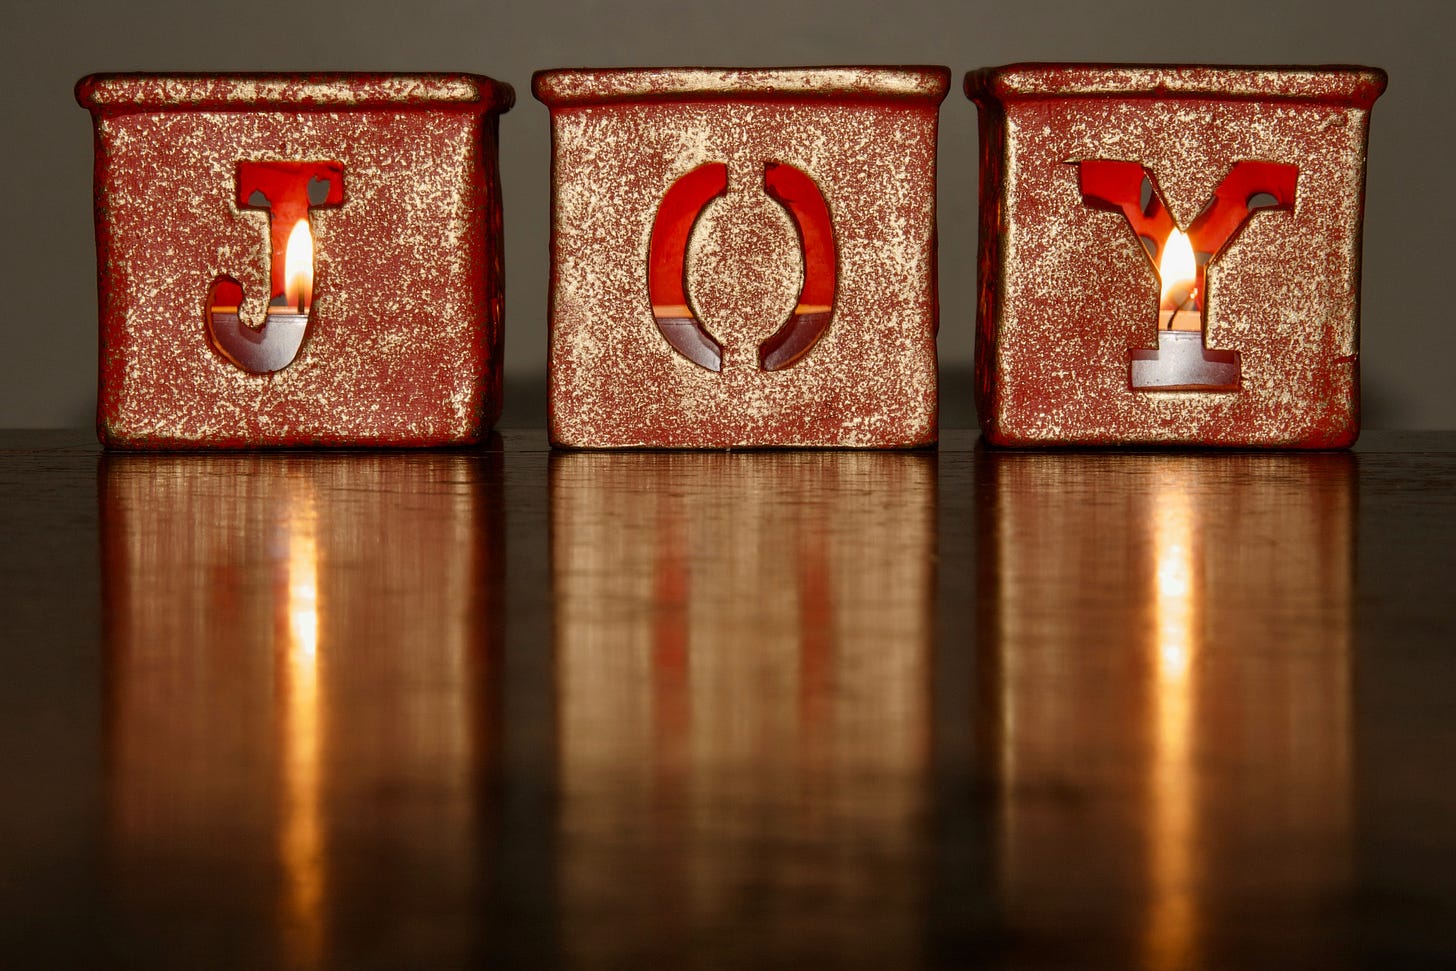 The candles that spell out "Joy."